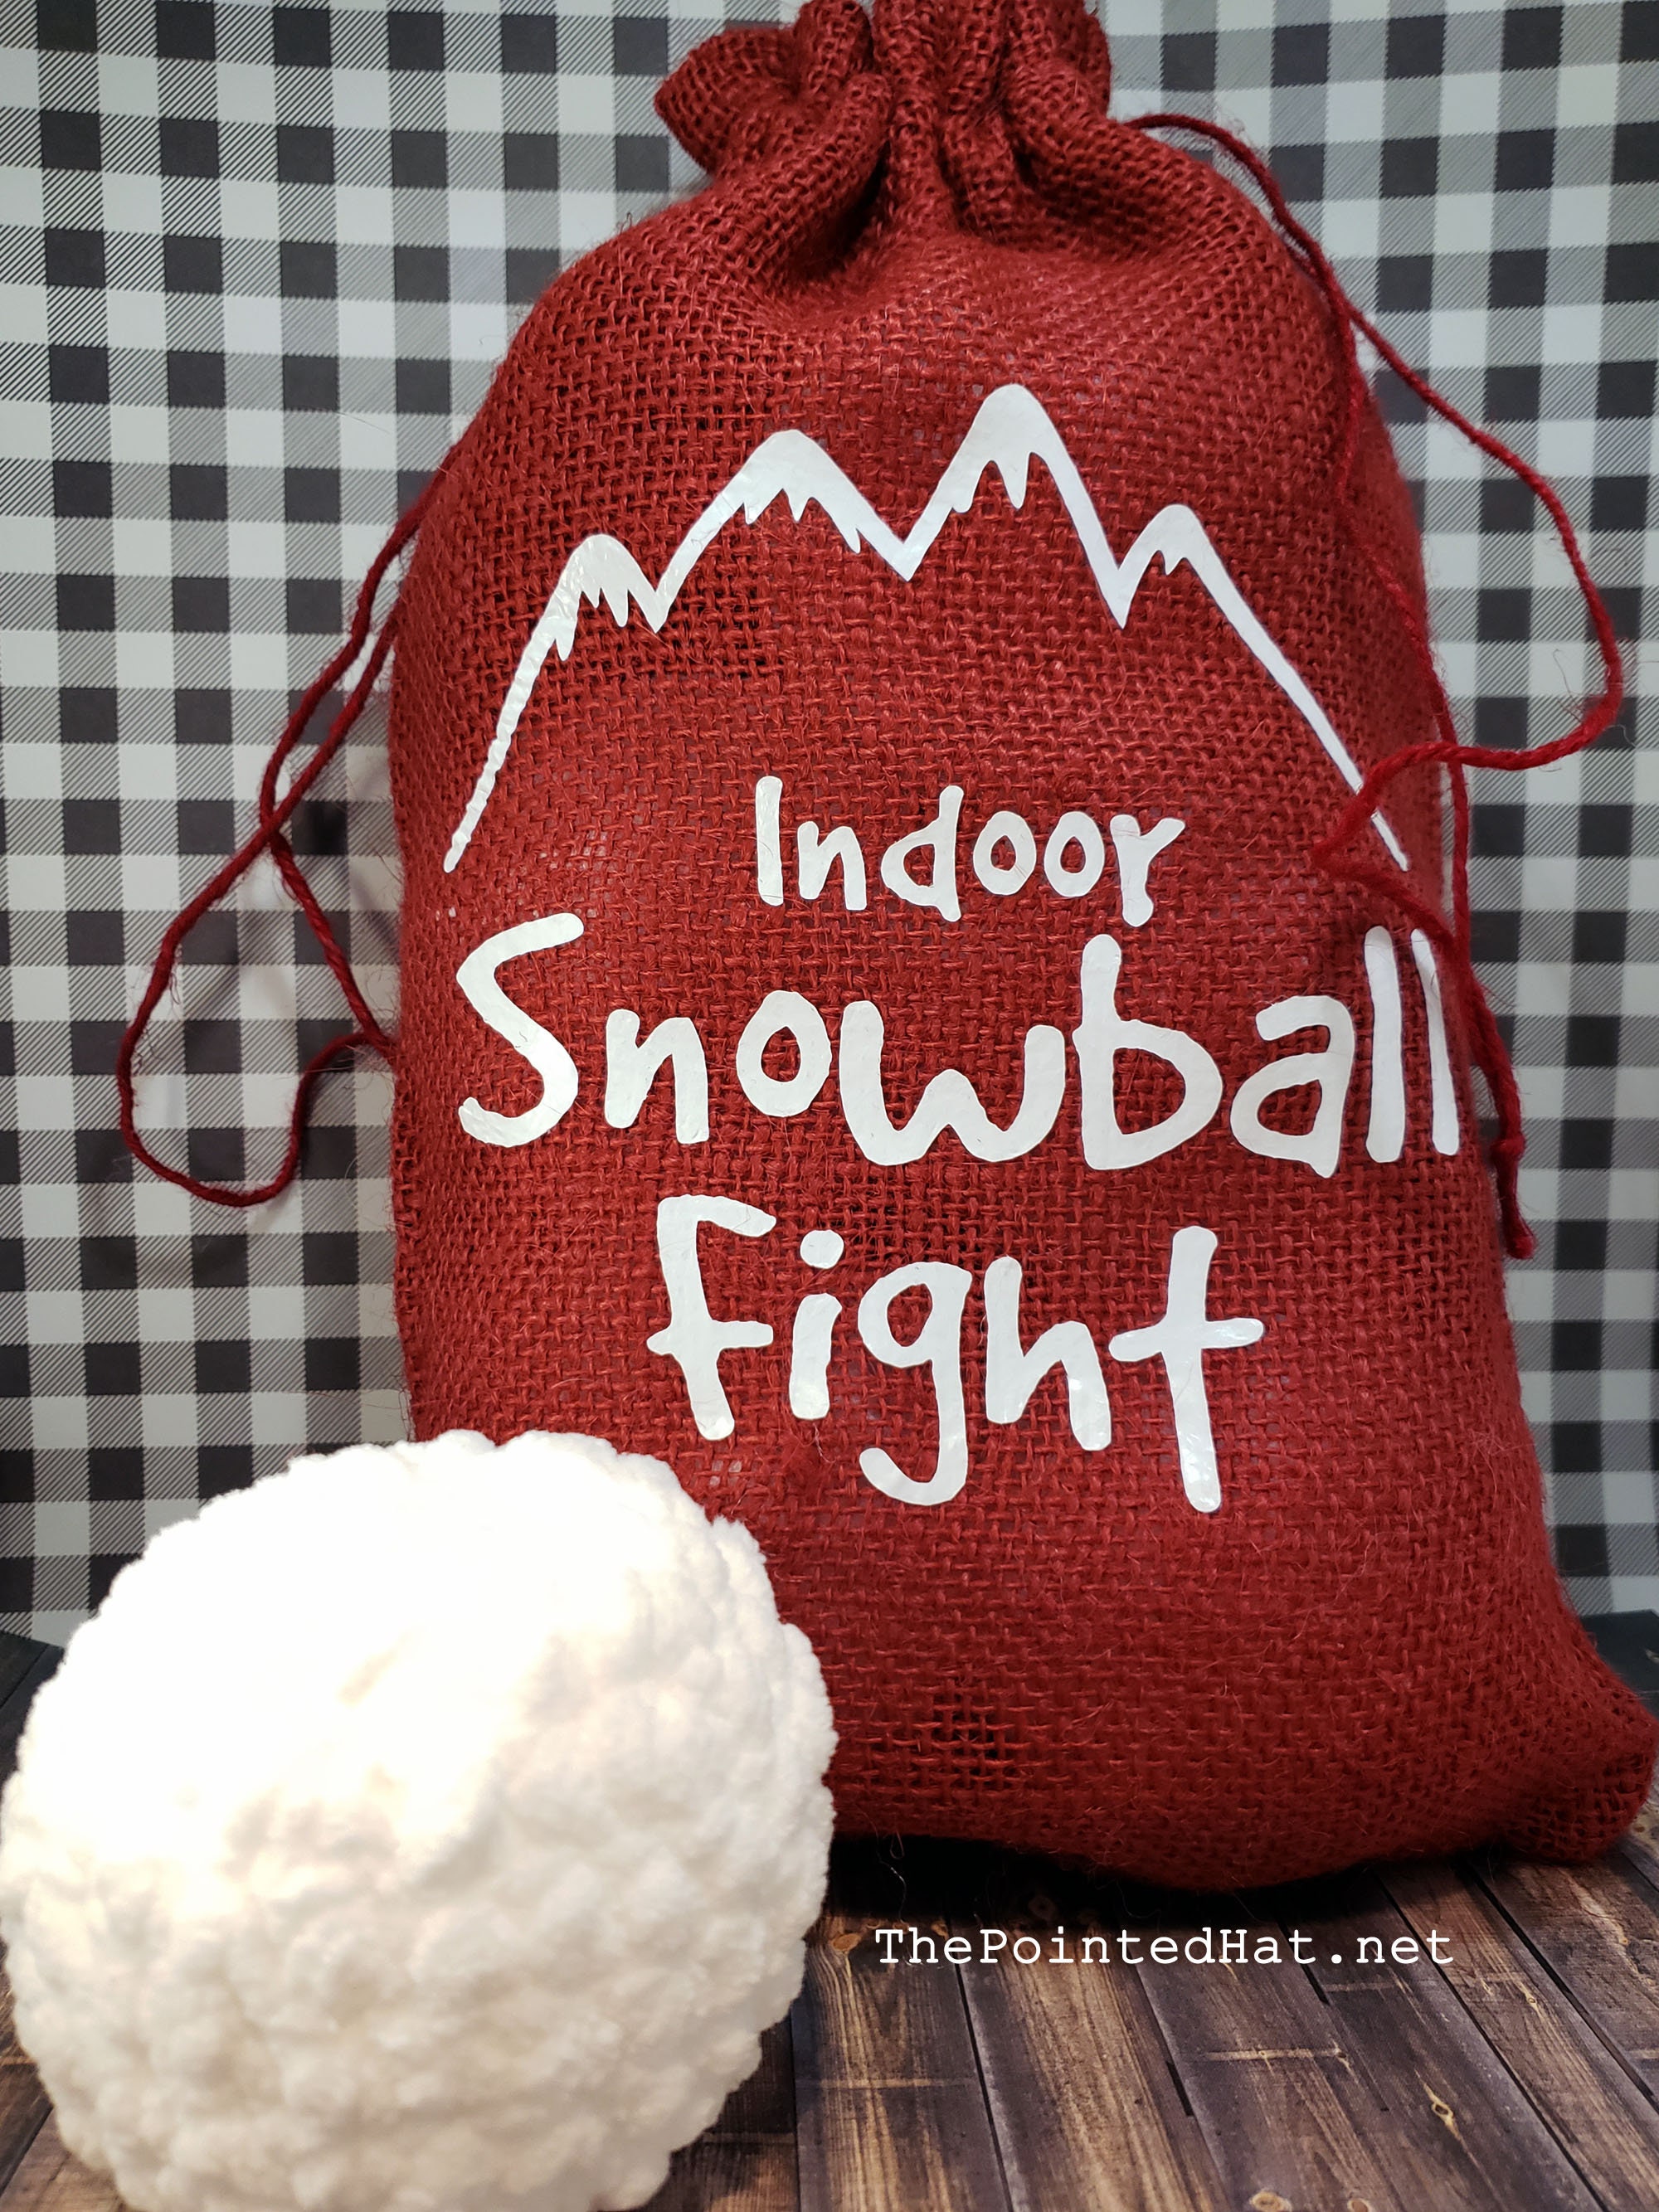 Have an Indoor Snowball Fight!